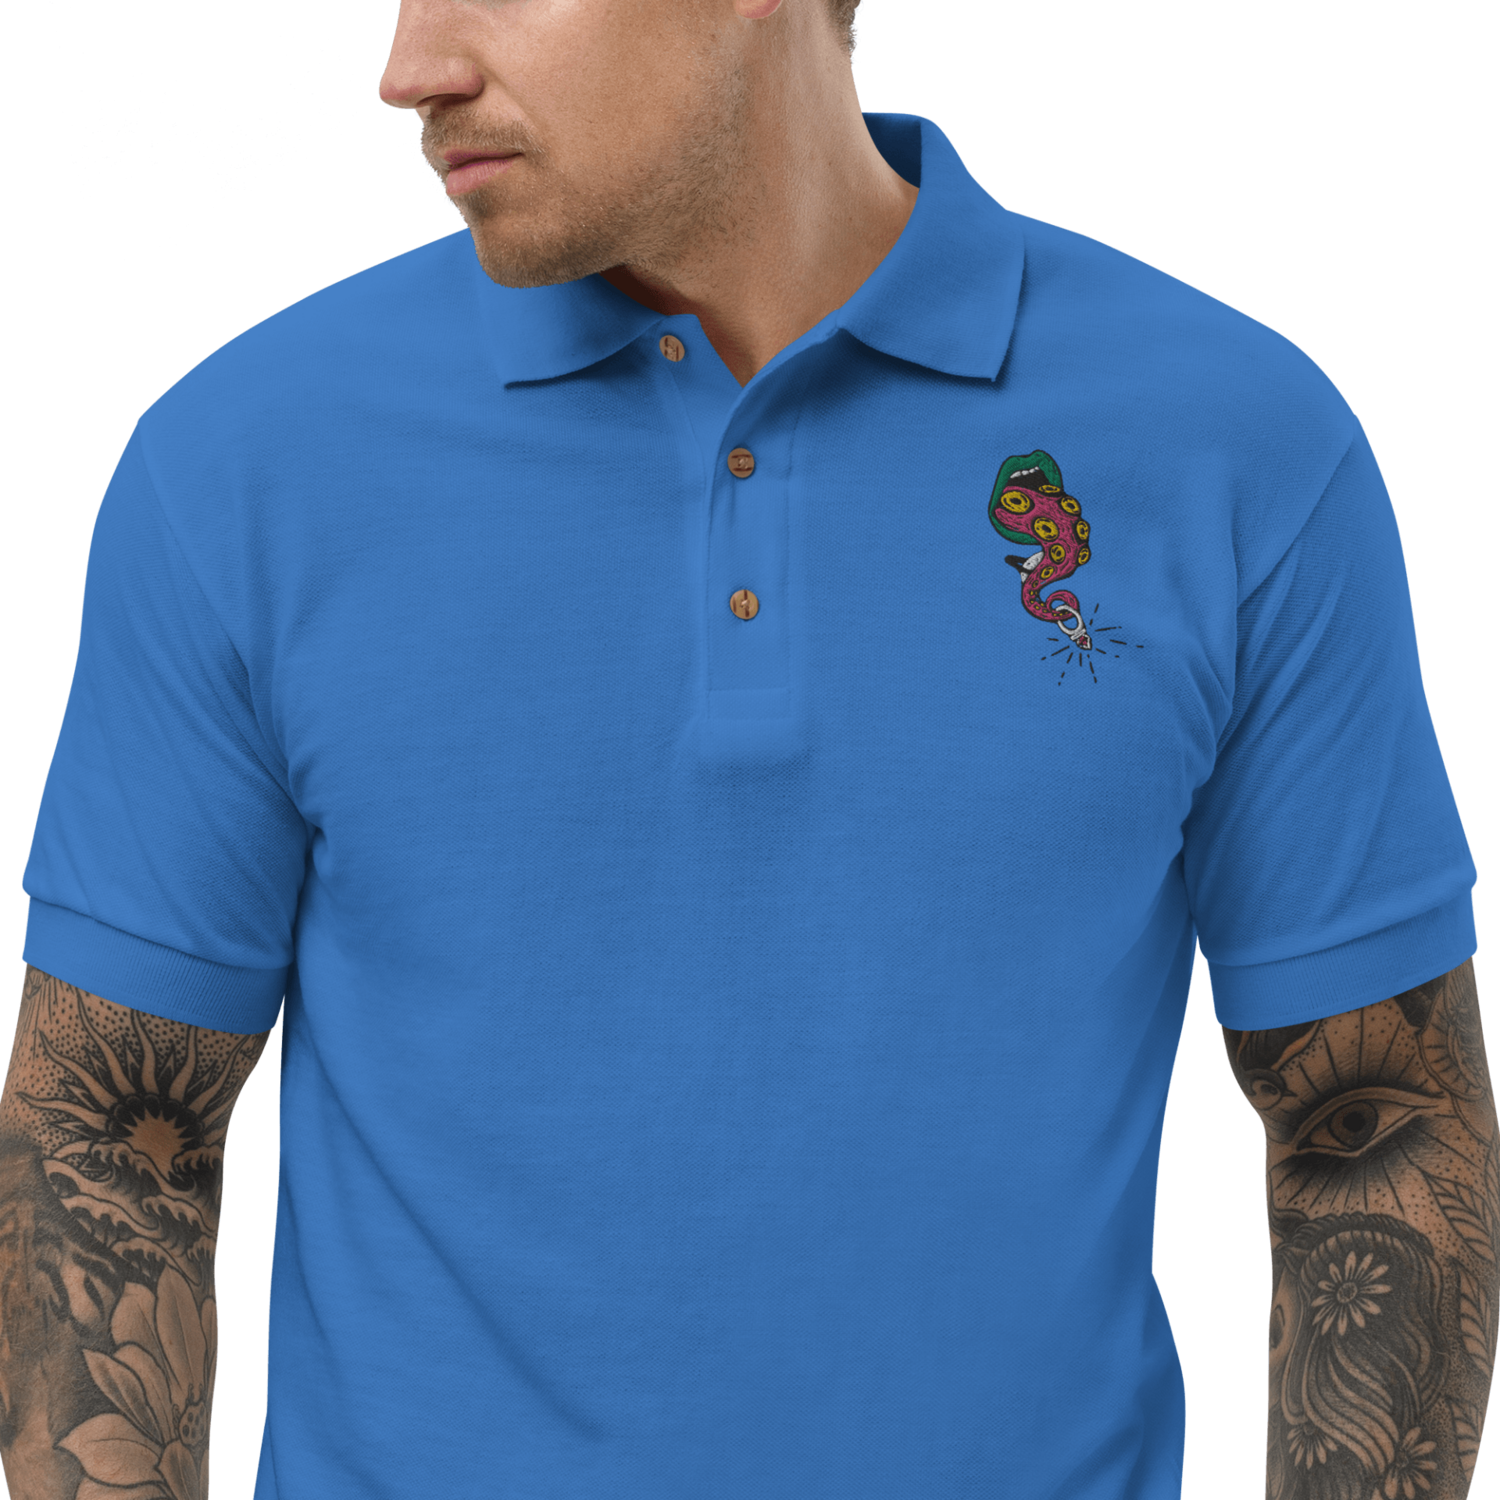 DTO Embroidered Polo Shirt - Blue